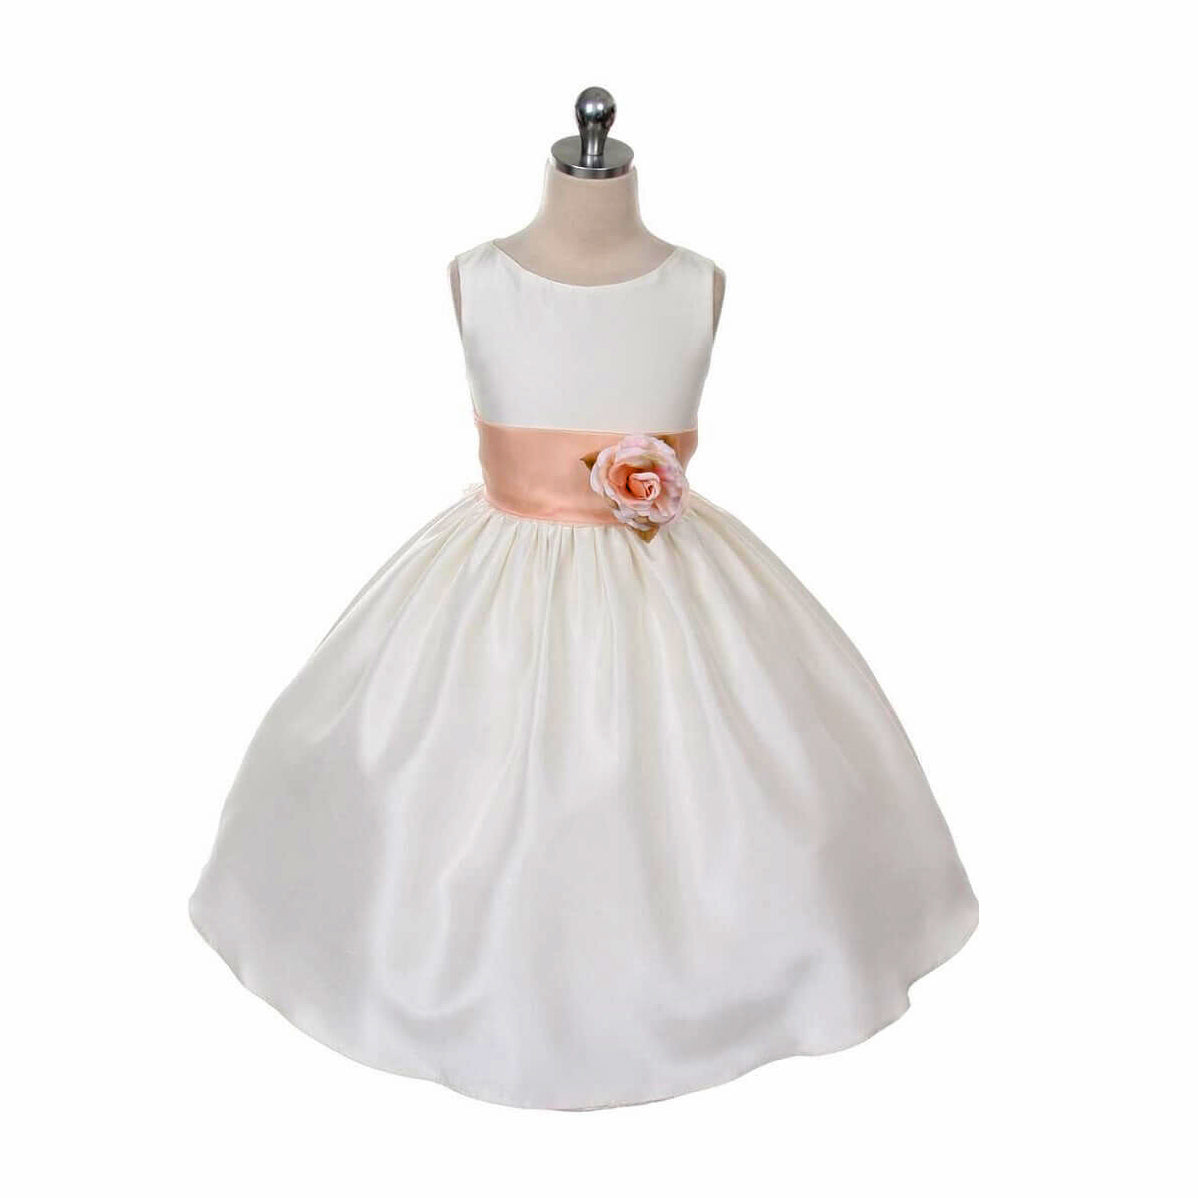 UK Flower Girl Boutique Morgan Dress with apricot sash